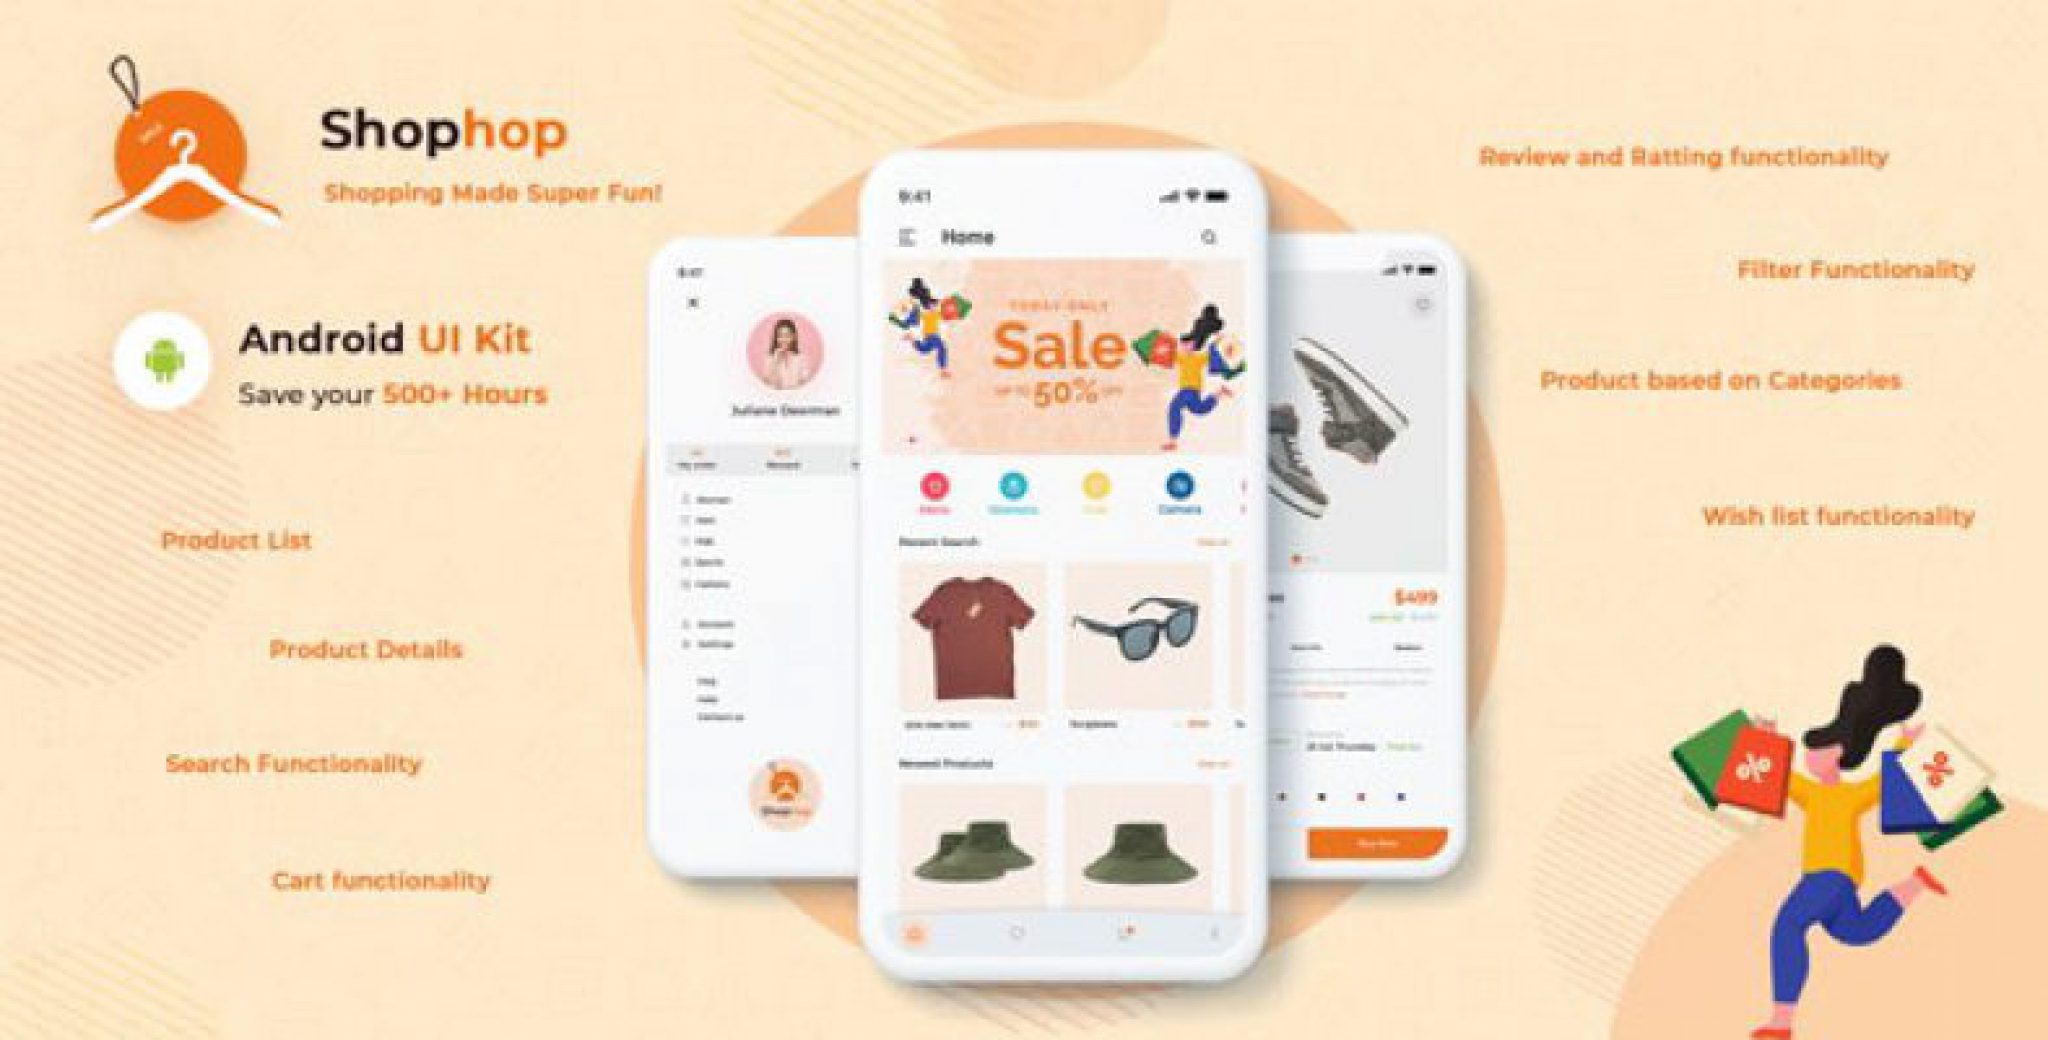 shophop-ecommerce-app-ui-templates-android-kotlin-nulled